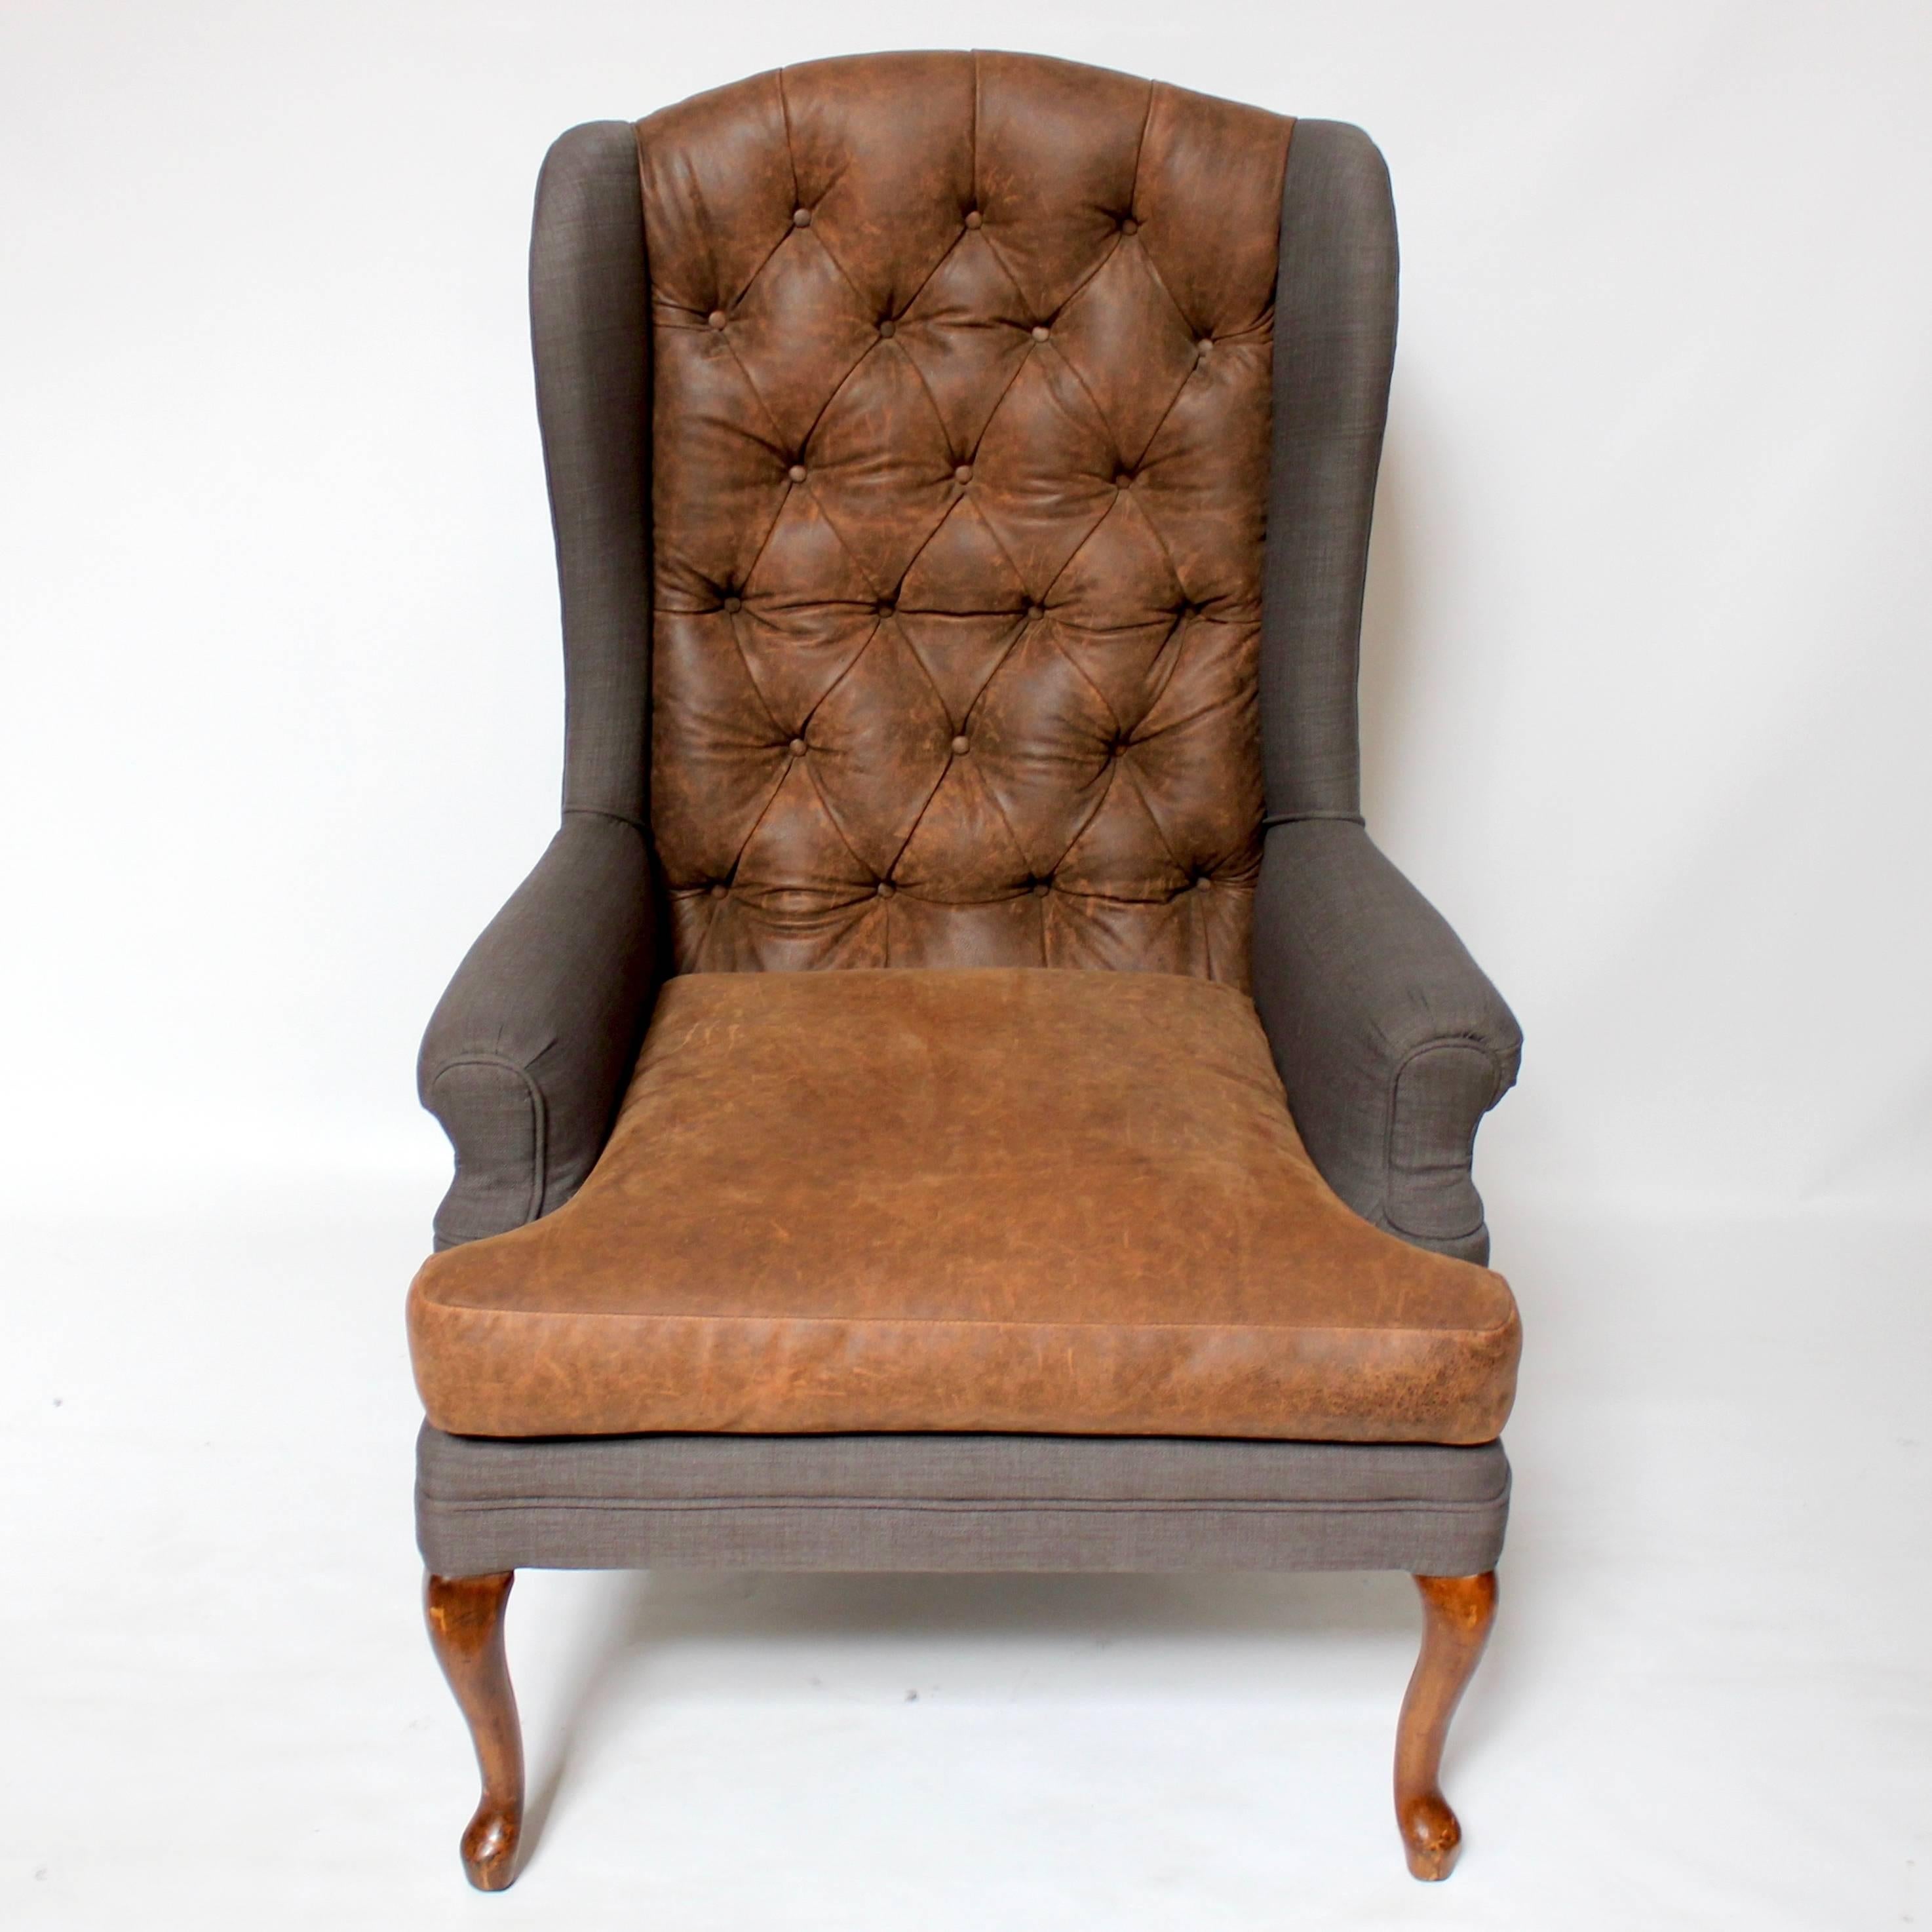 Chesterfield Pair of Vintage American Hardwood Wingback Chairs with Napa Leather Upholstery